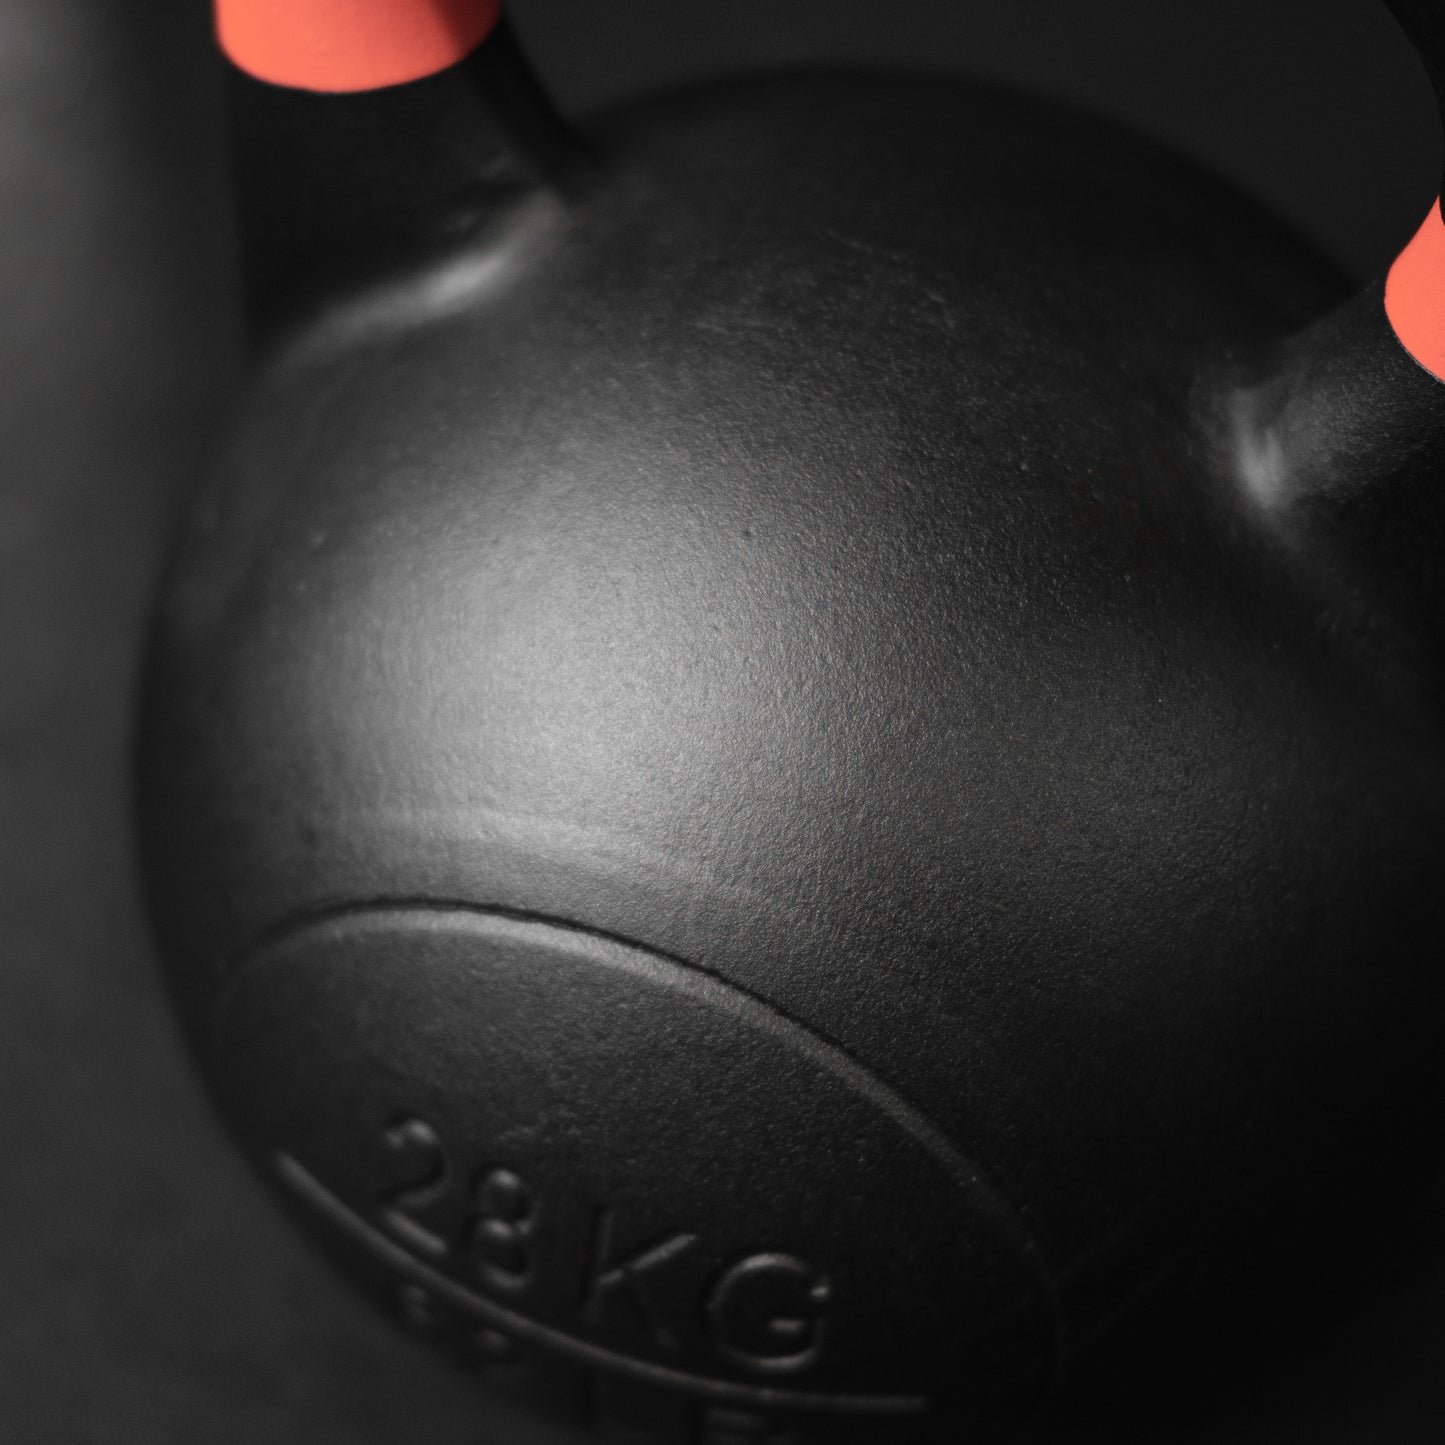 Powder Coated Competition Kettlebells